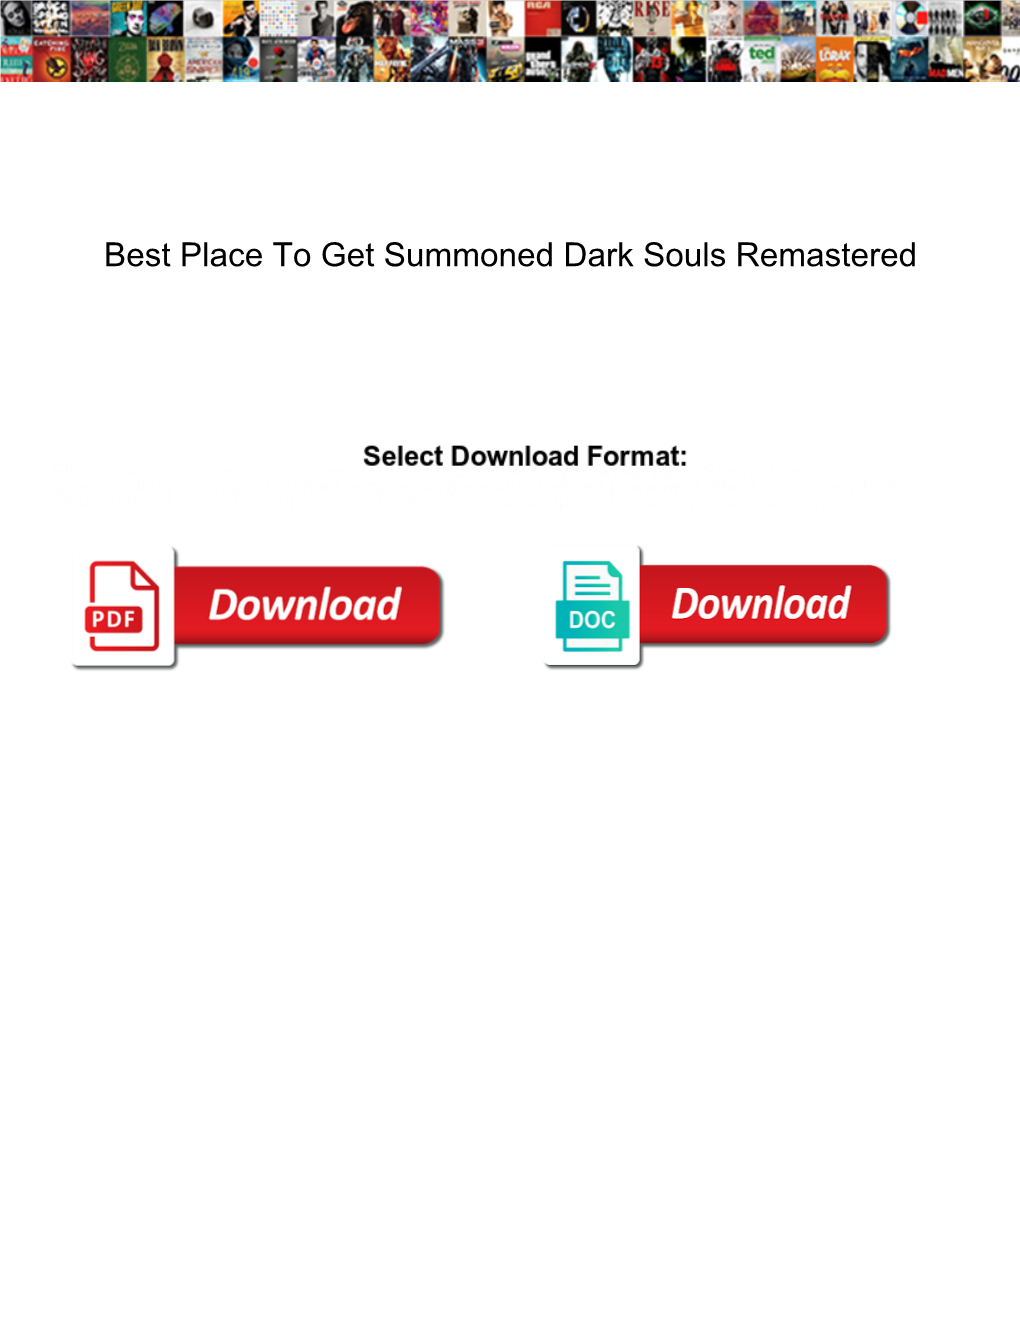 Best Place to Get Summoned Dark Souls Remastered